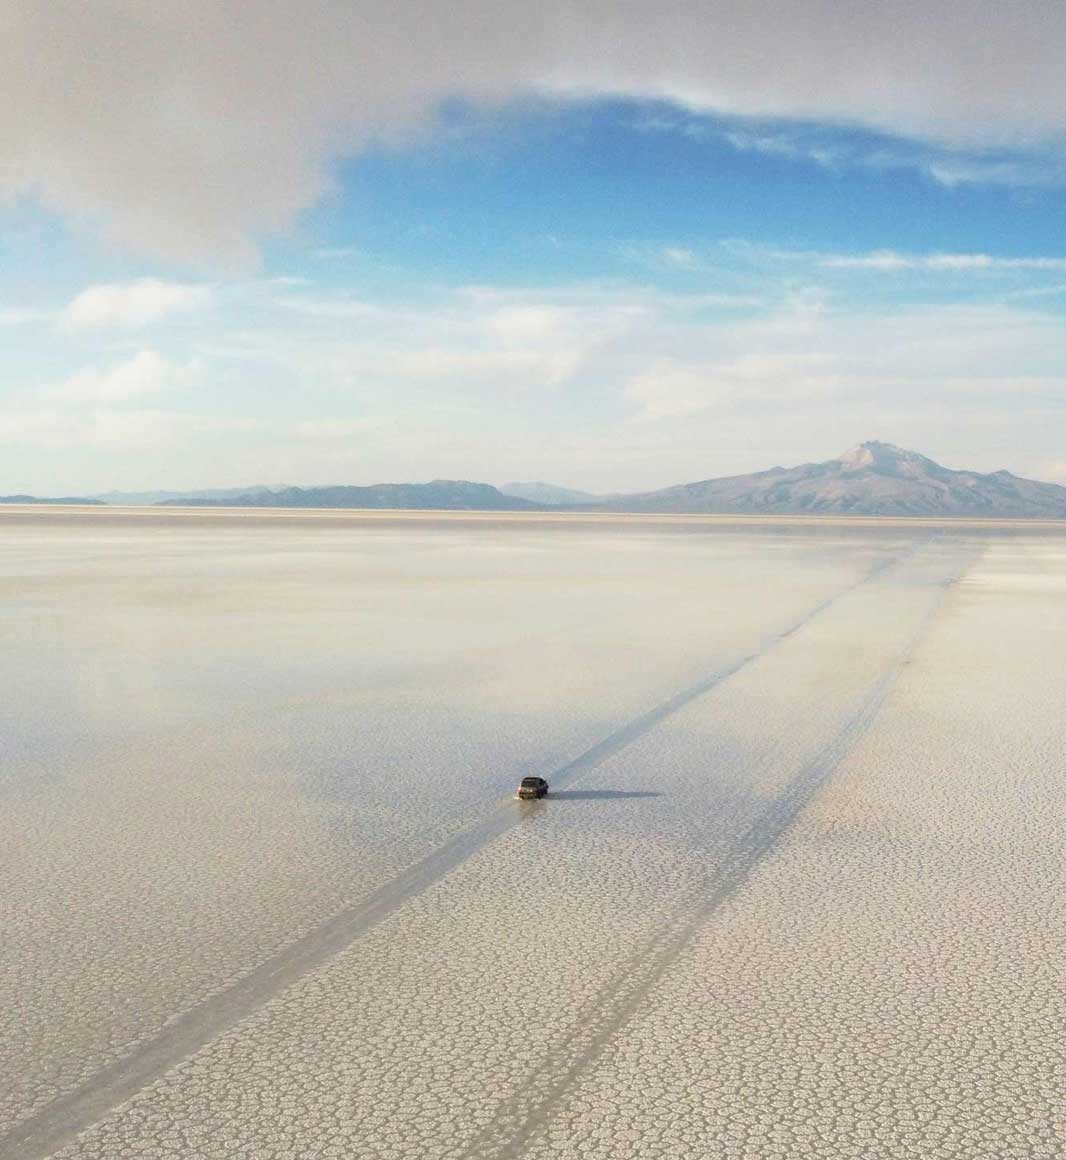 Driving across the Uyini Salt Flats in Bolivia